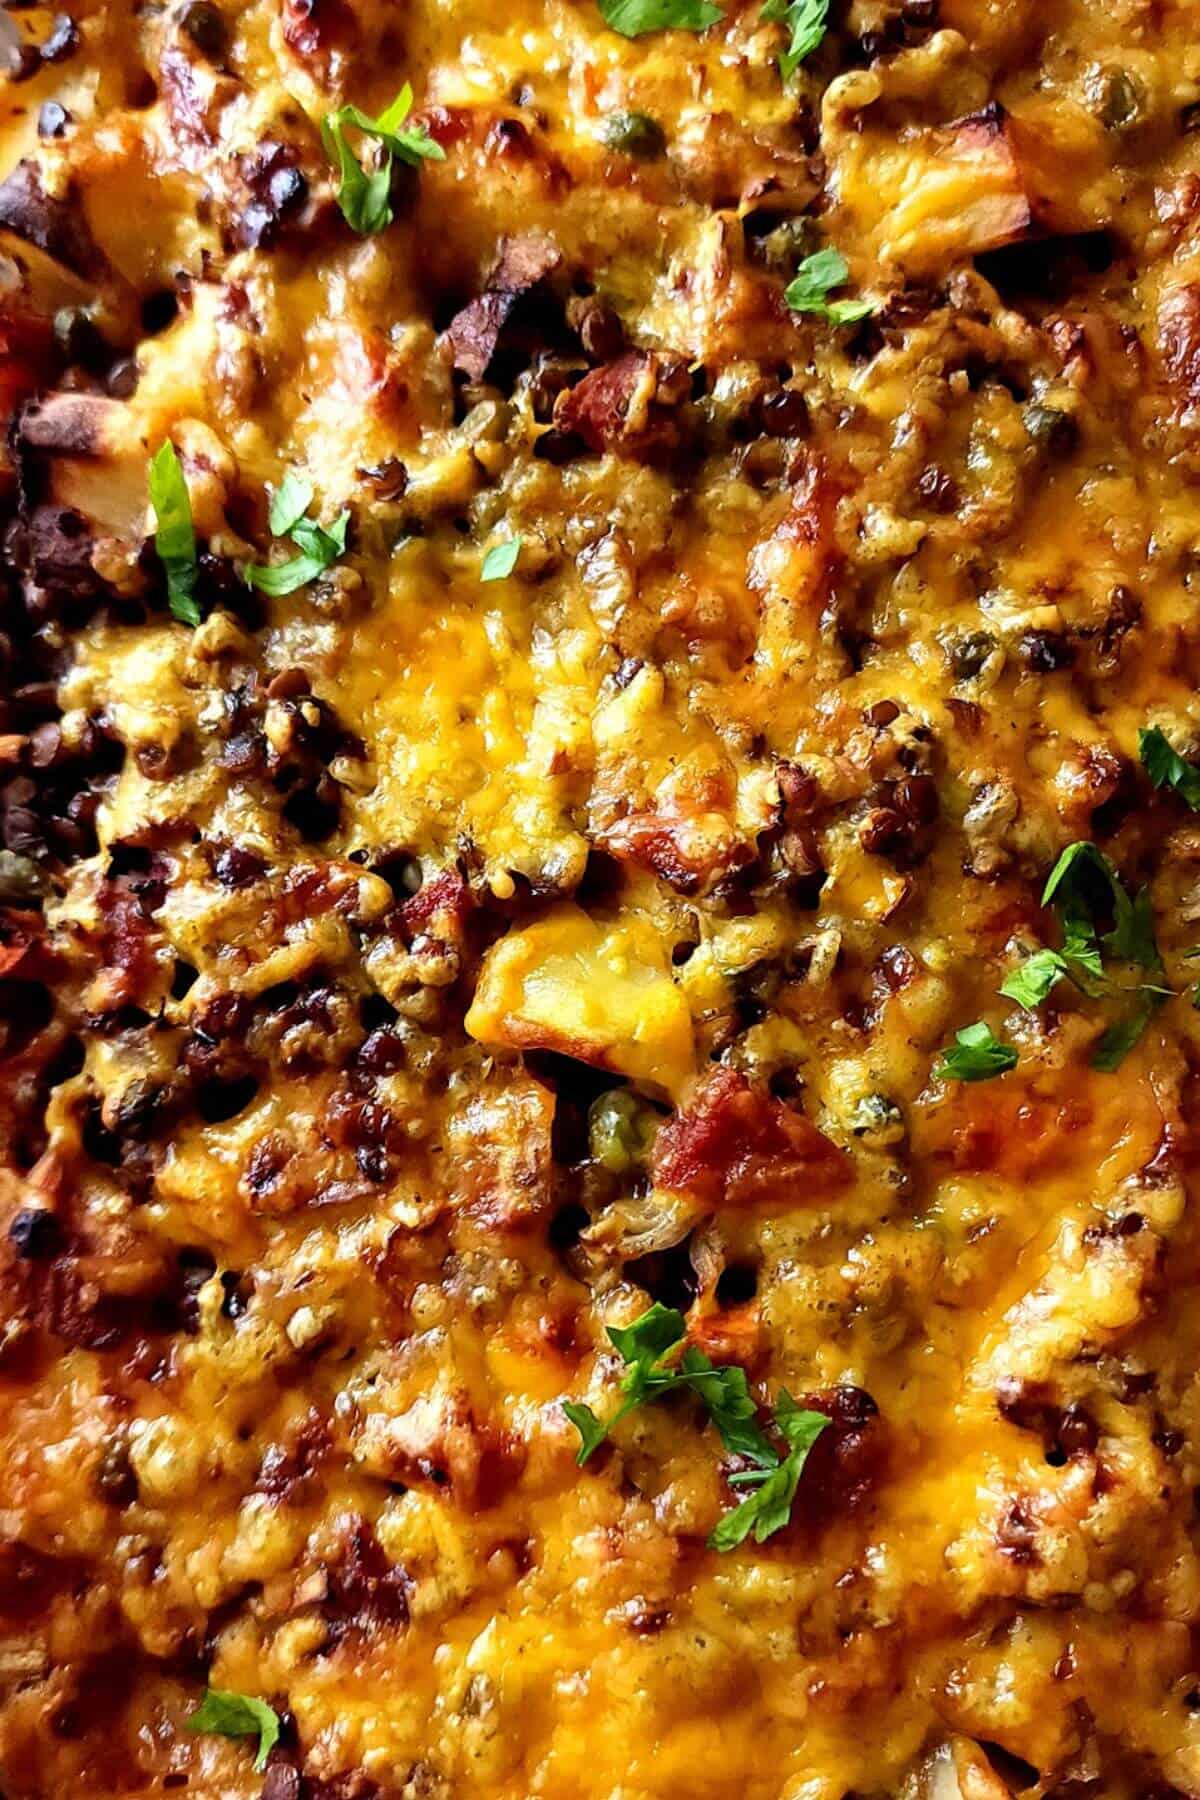 Baked lentil casserole with cheese and vegetables garnished with chopped parsley.